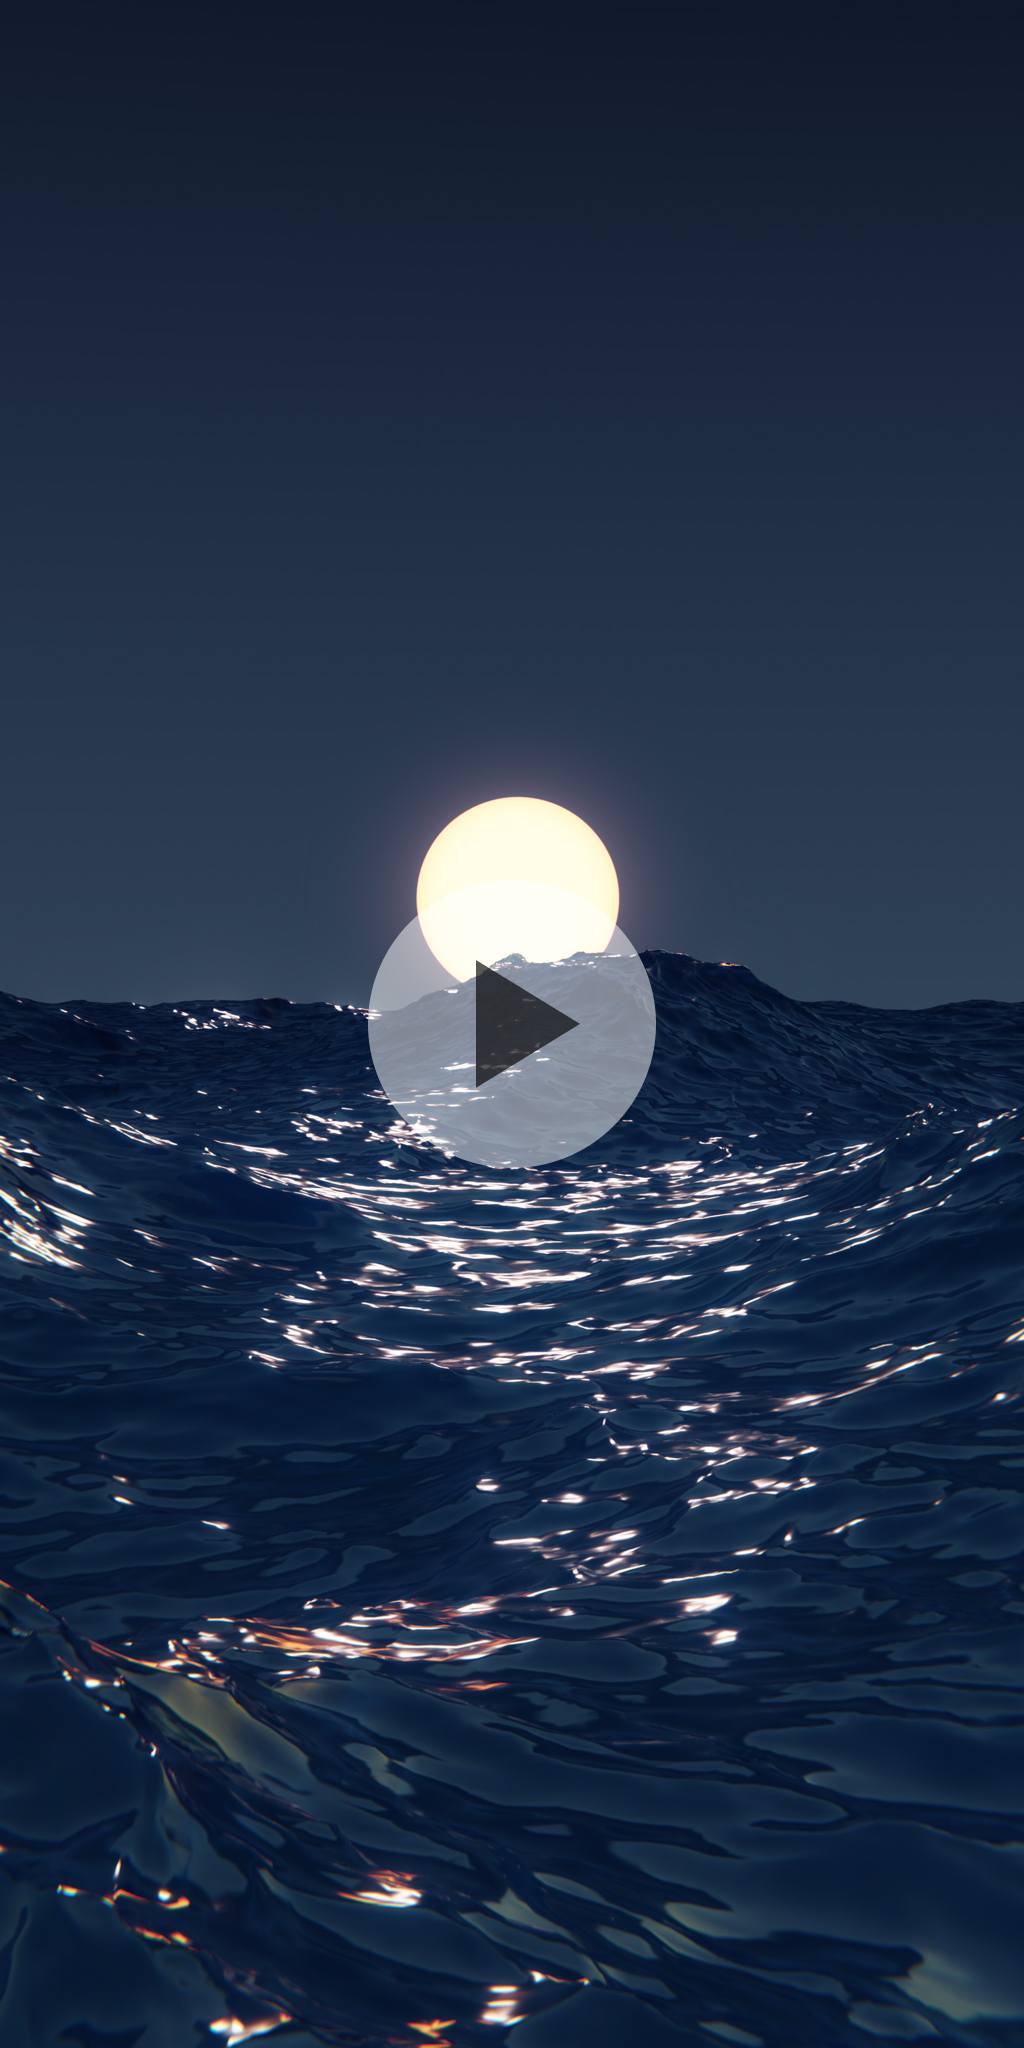 Water and moon. Live wallpaper for Lenovo phones